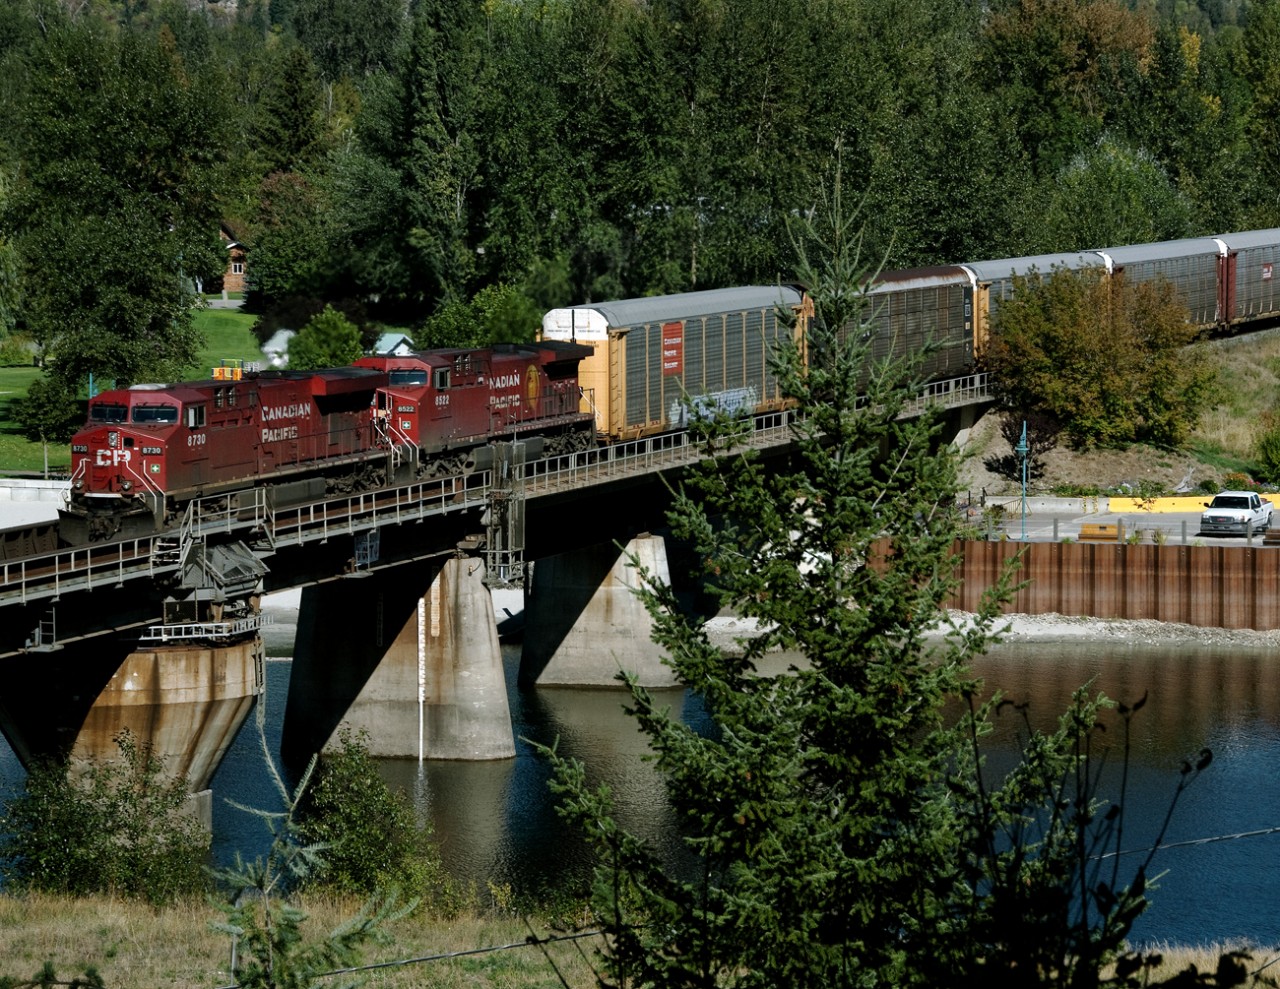 Westbound 199 with several auto racks crosses the swing bridge over the Narrows between Mara and Shuswap Lakes at Sicamous. The bridge is operational and is opened frequently for recreational boats such as house and sail boats.